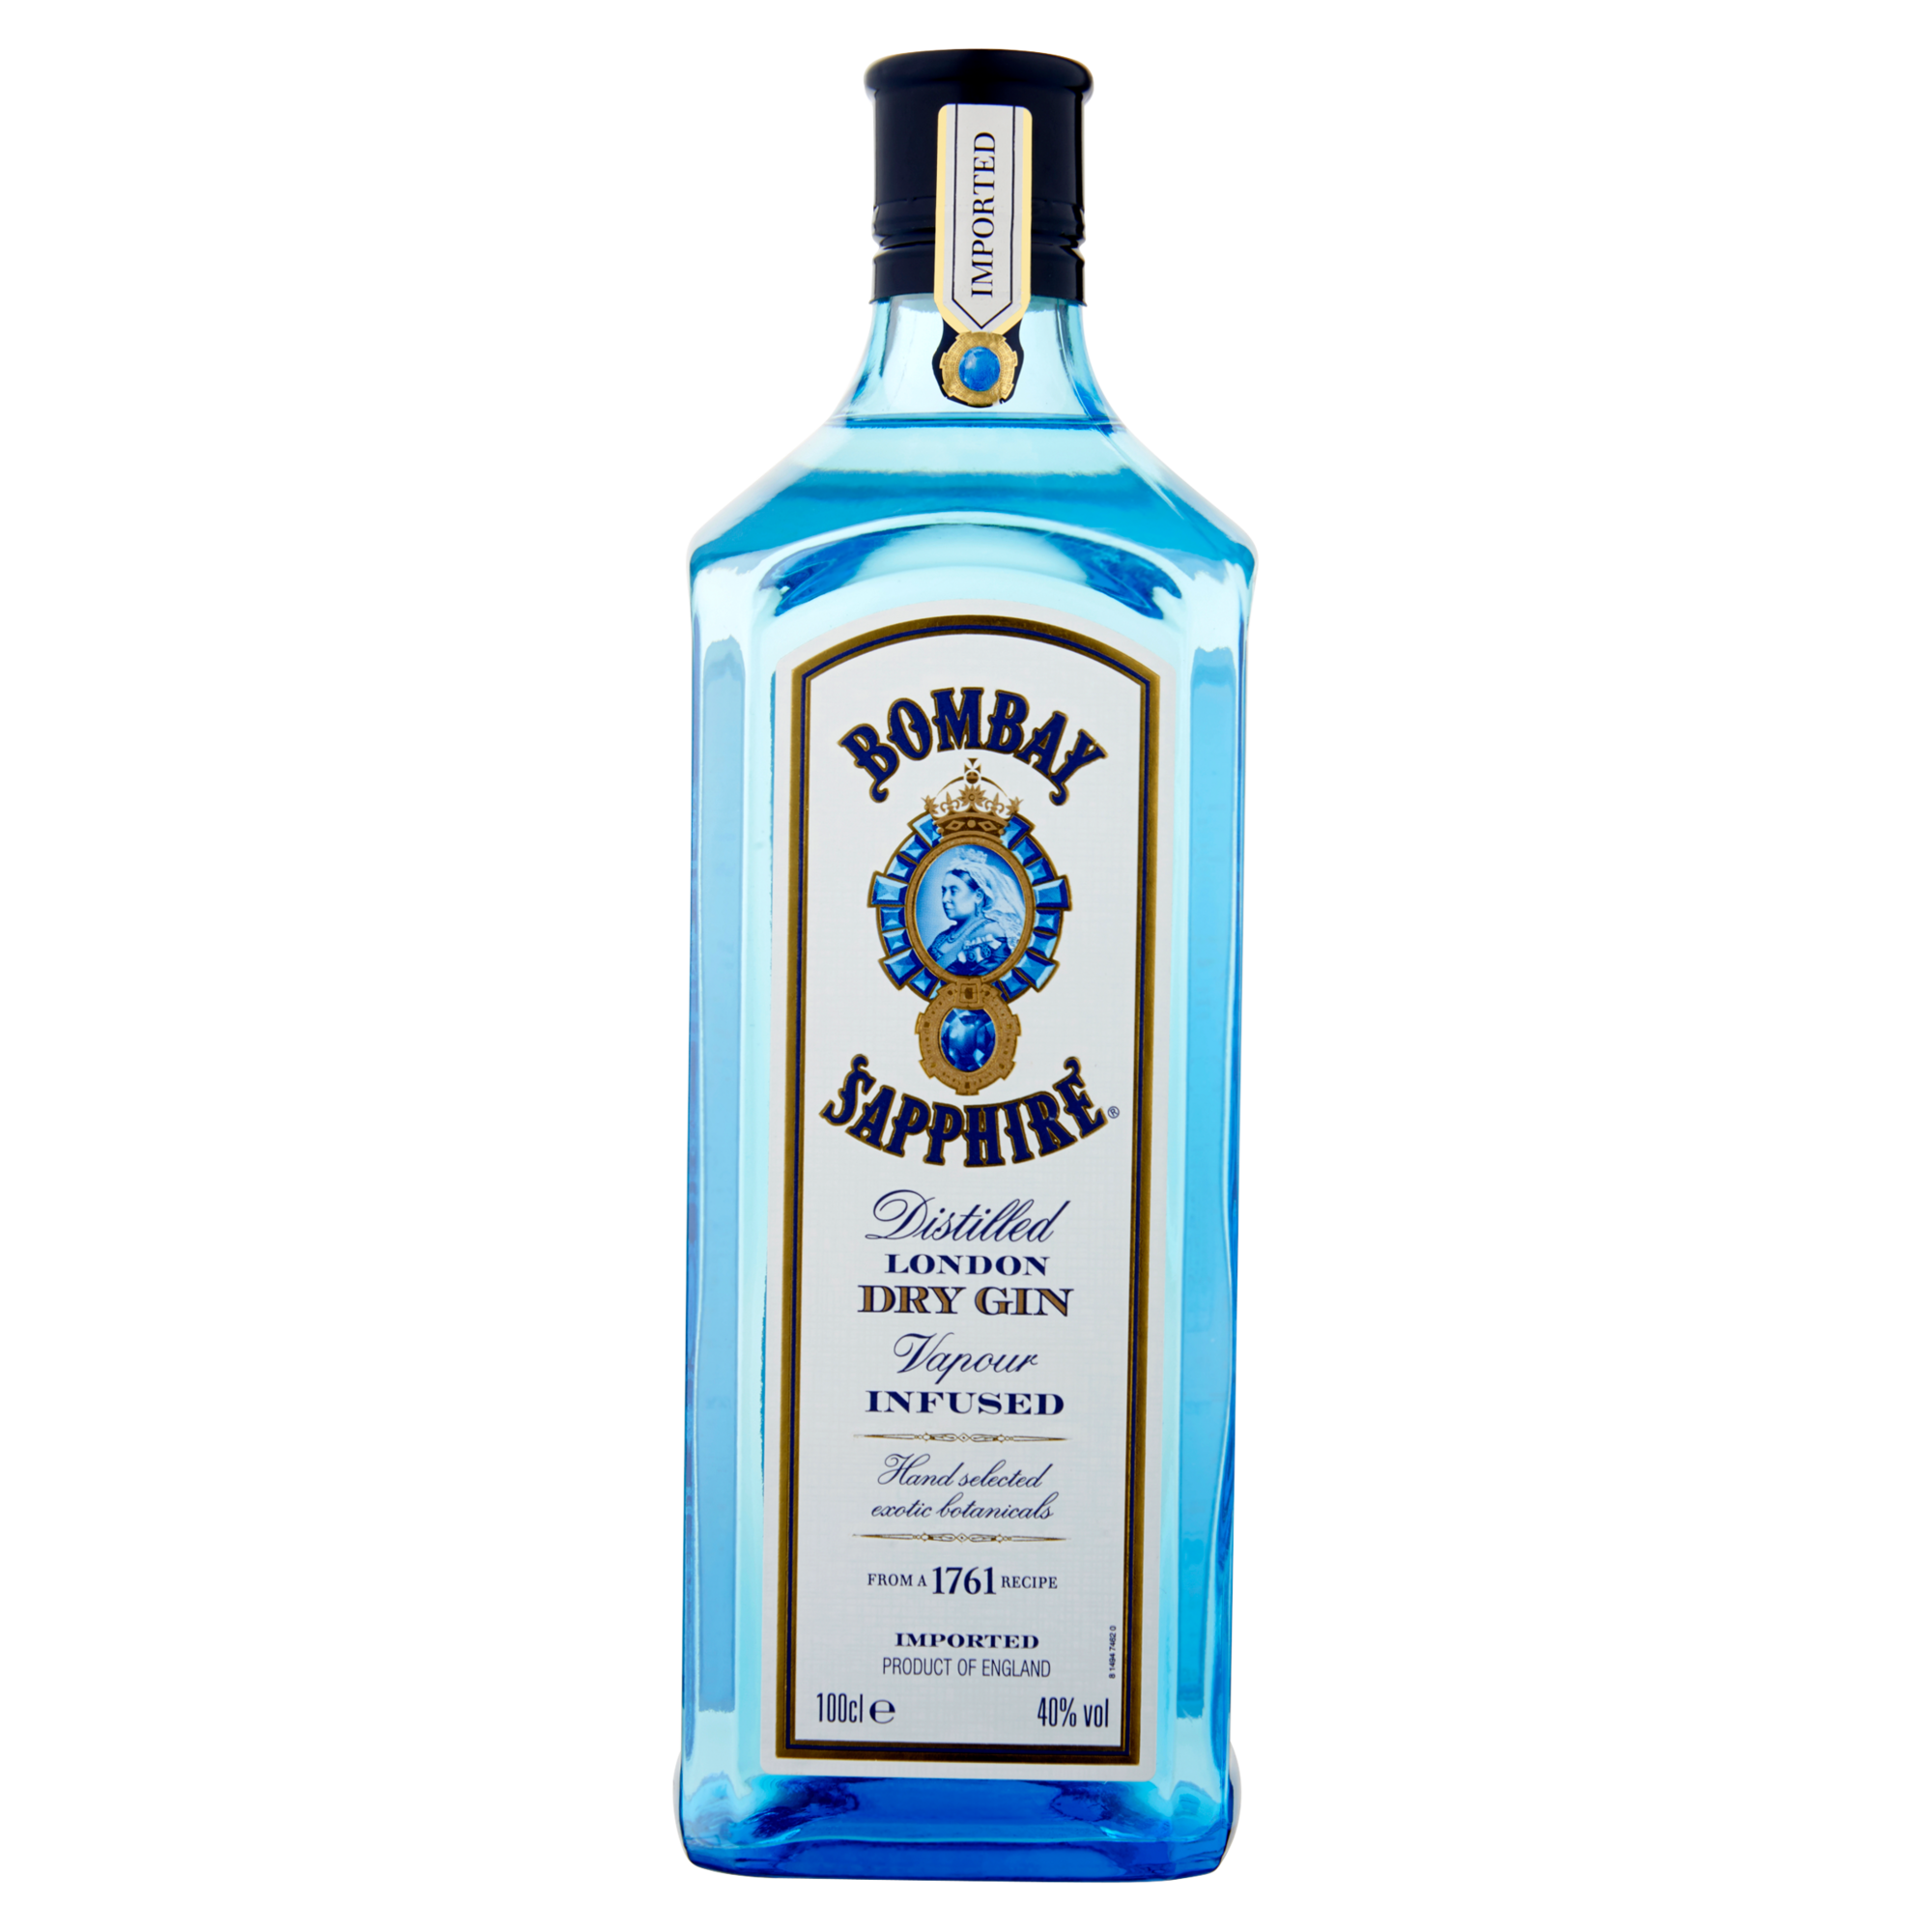 72141 Bombay saphire gin 1ltr